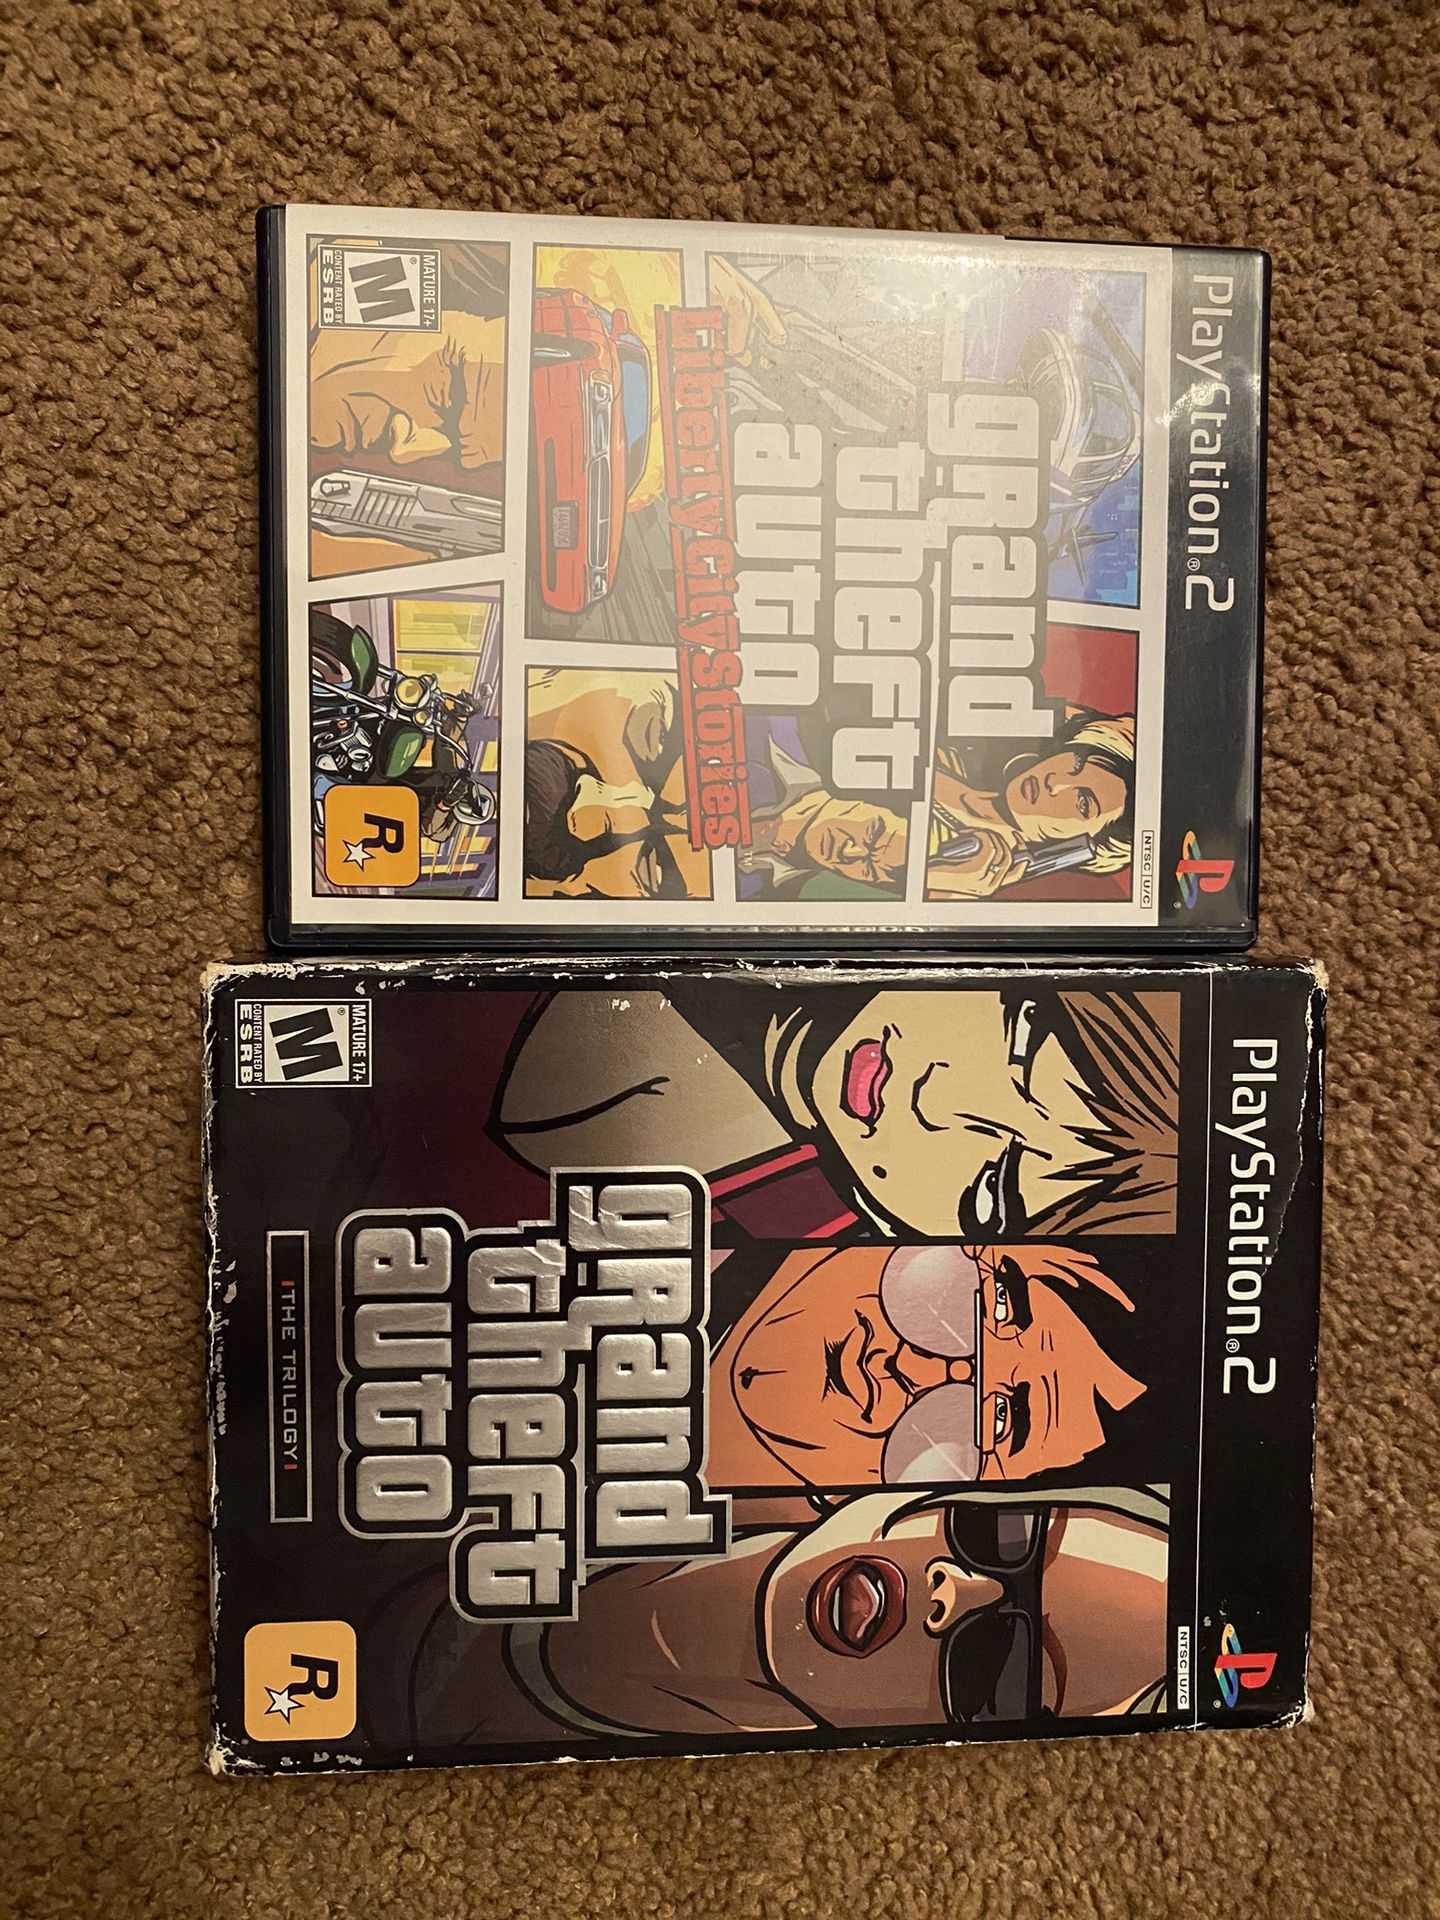 Grand Theft Auto 4 Game Set for PS2